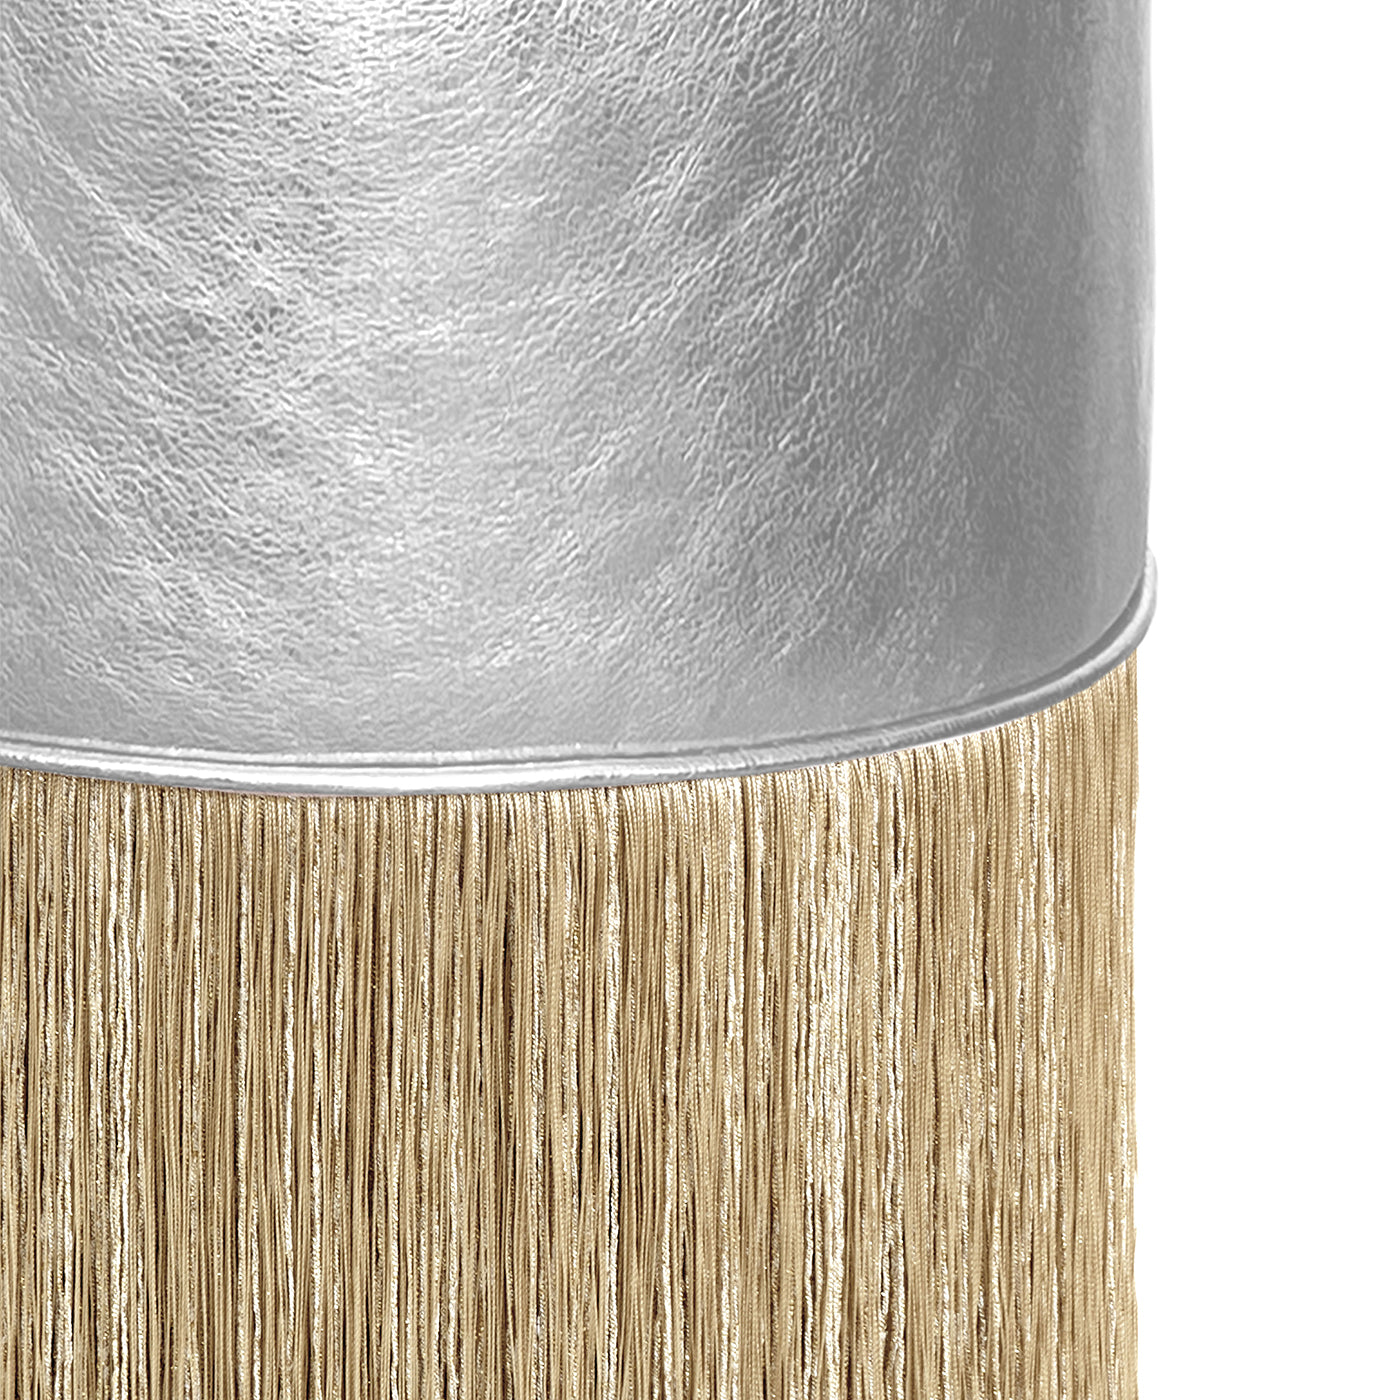 Gleaming Silver Leather Gold Fringes Pouf by Lorenza Bozzoli - Alternative view 1